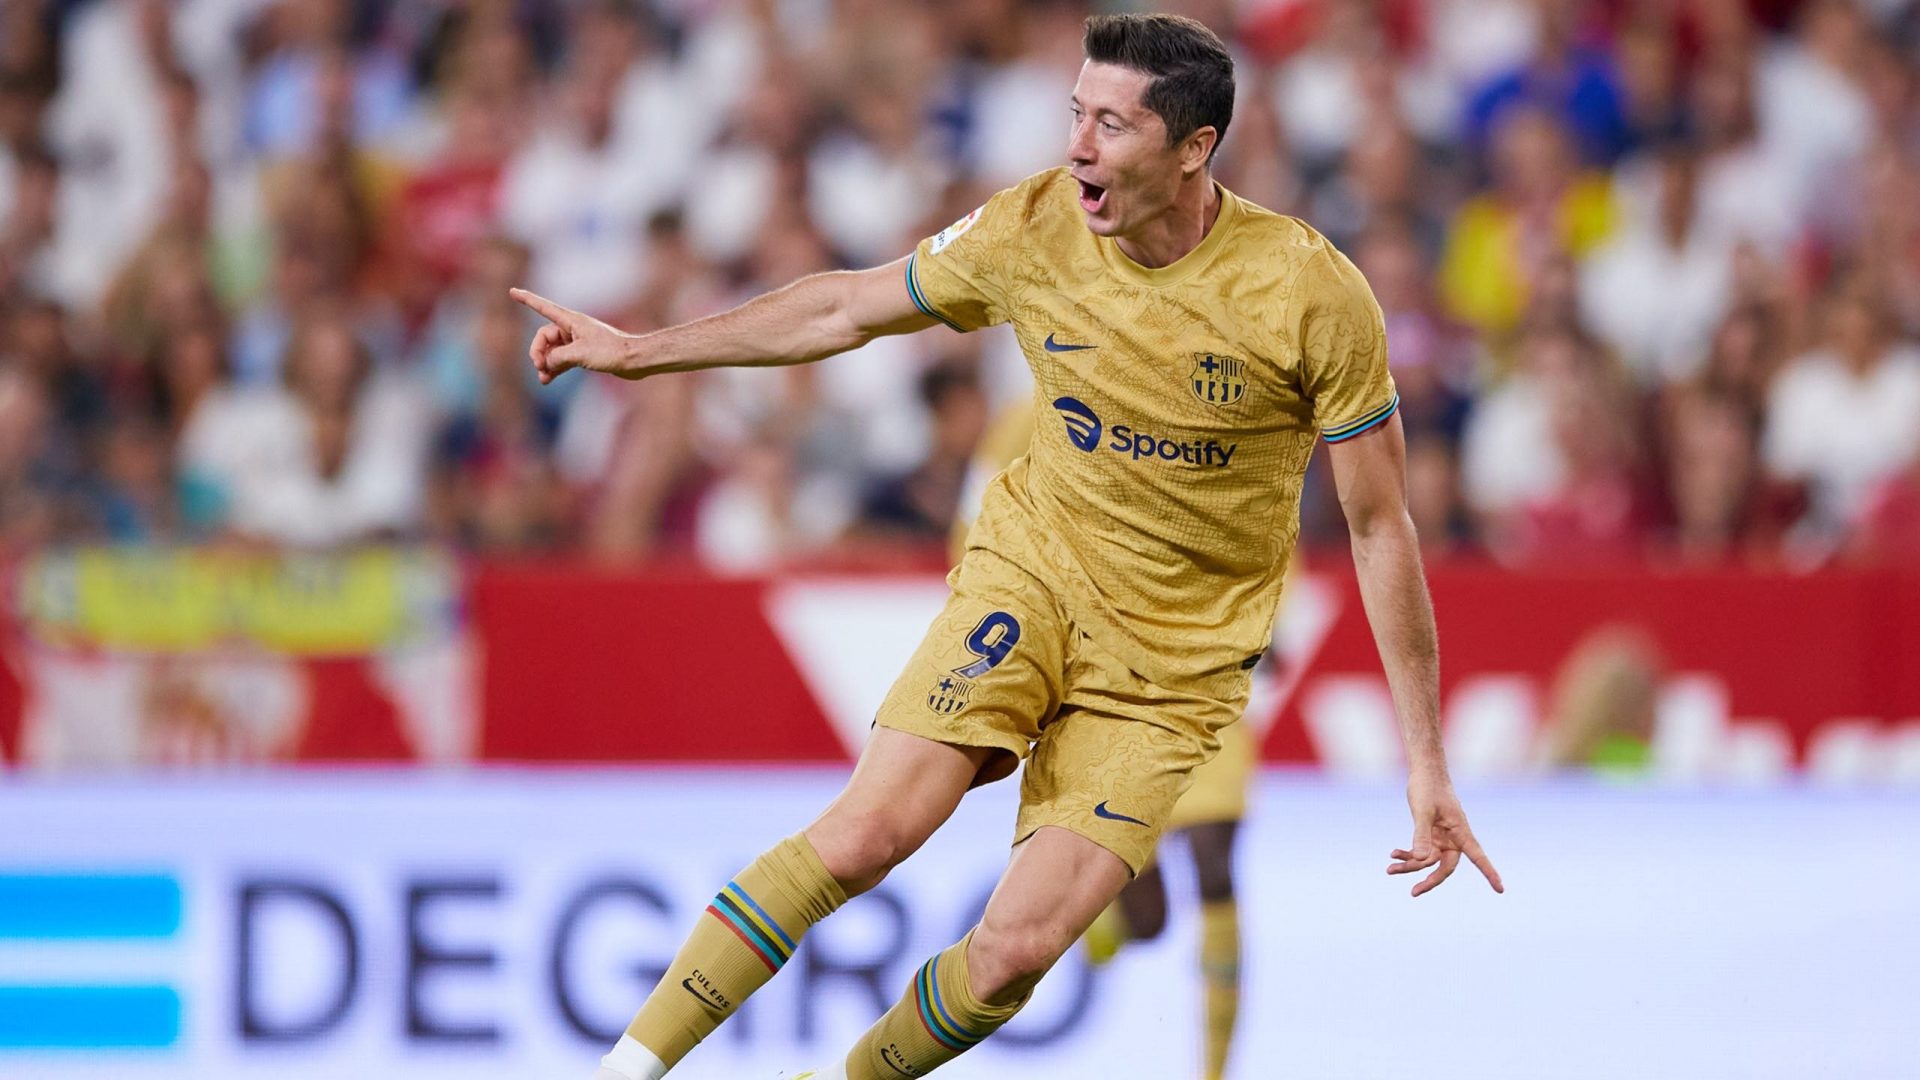 Robert Lewandowski has been pleasantly surprised by life with the Catalan giants.